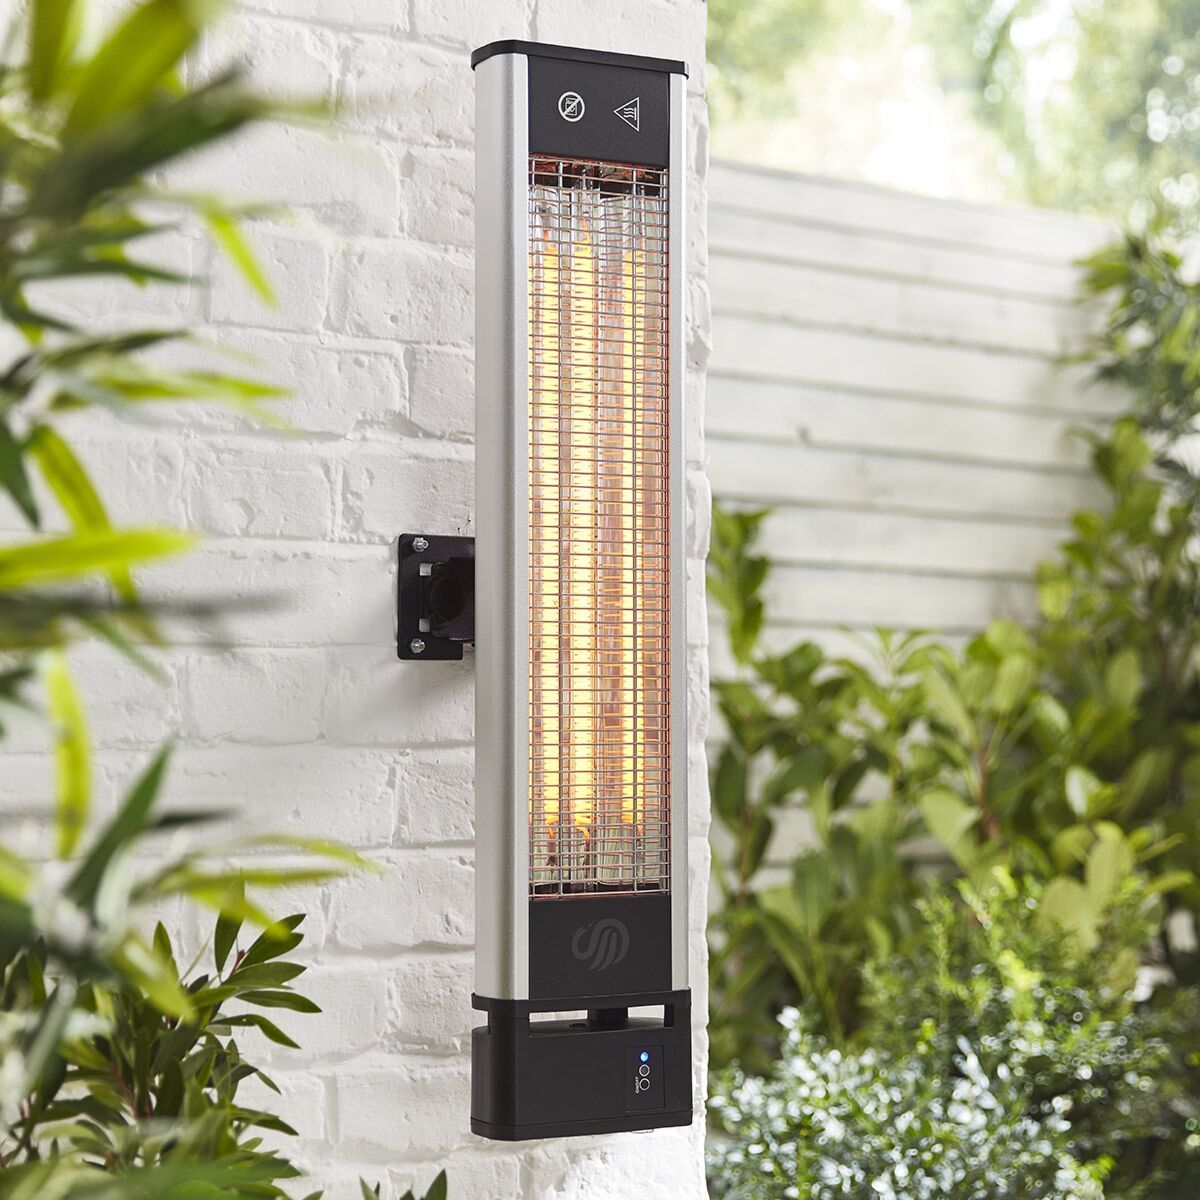 Best Patio Heaters To In The Uk For 2021 - Freestanding Electric Patio Heaters Ireland